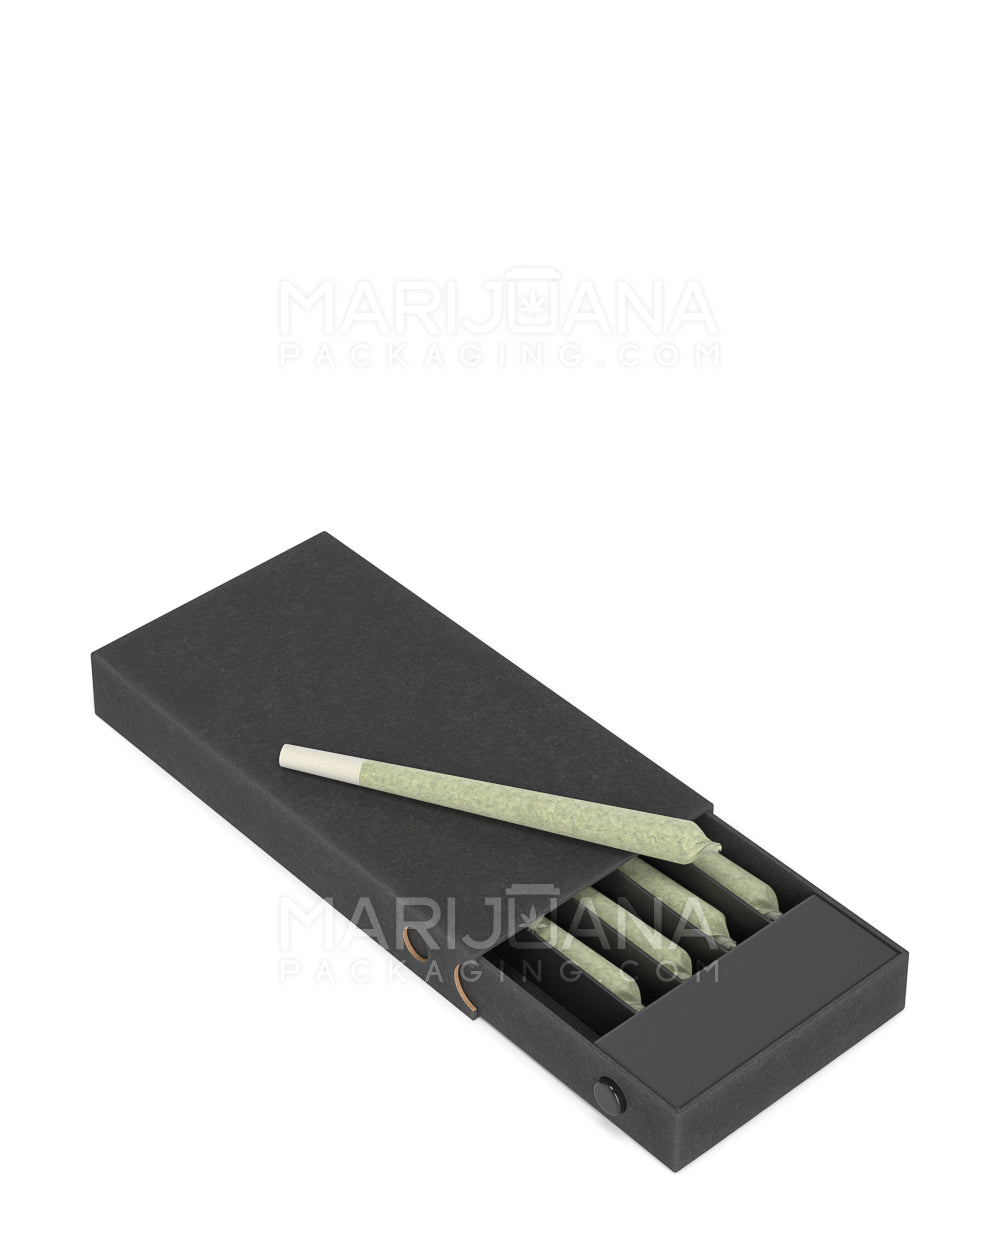 Child Resistant & Sustainable | 100% Recyclable Pre-Roll Slim Joint Case w/ Press Button | 145mm x 77mm - Black Cardboard - 100 Count